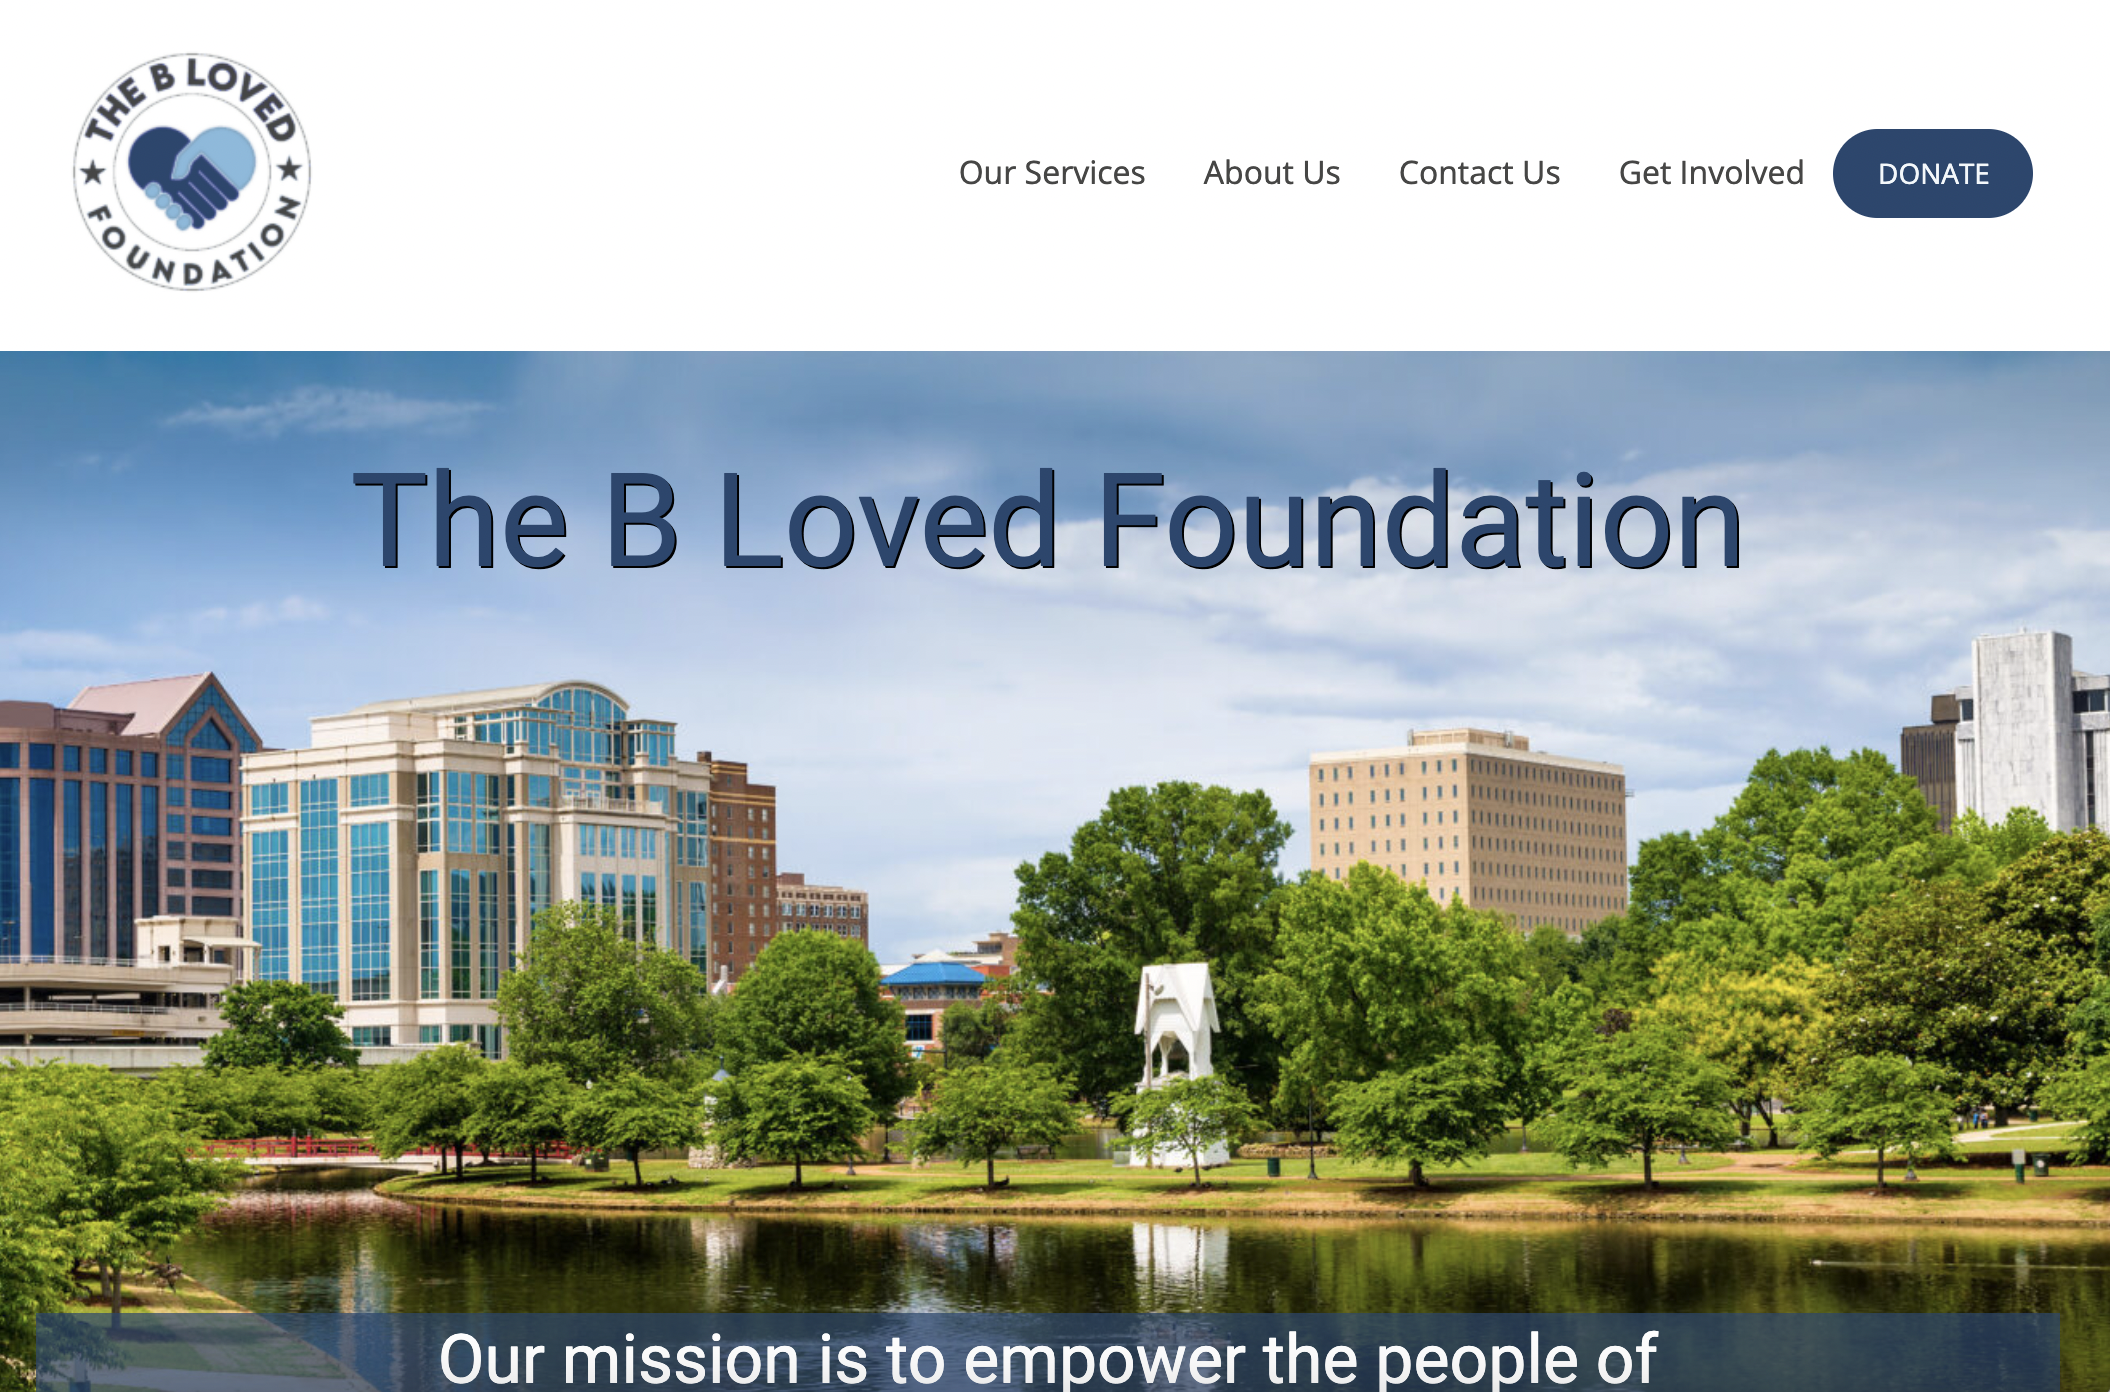 Landing page of the B Loved Foundation